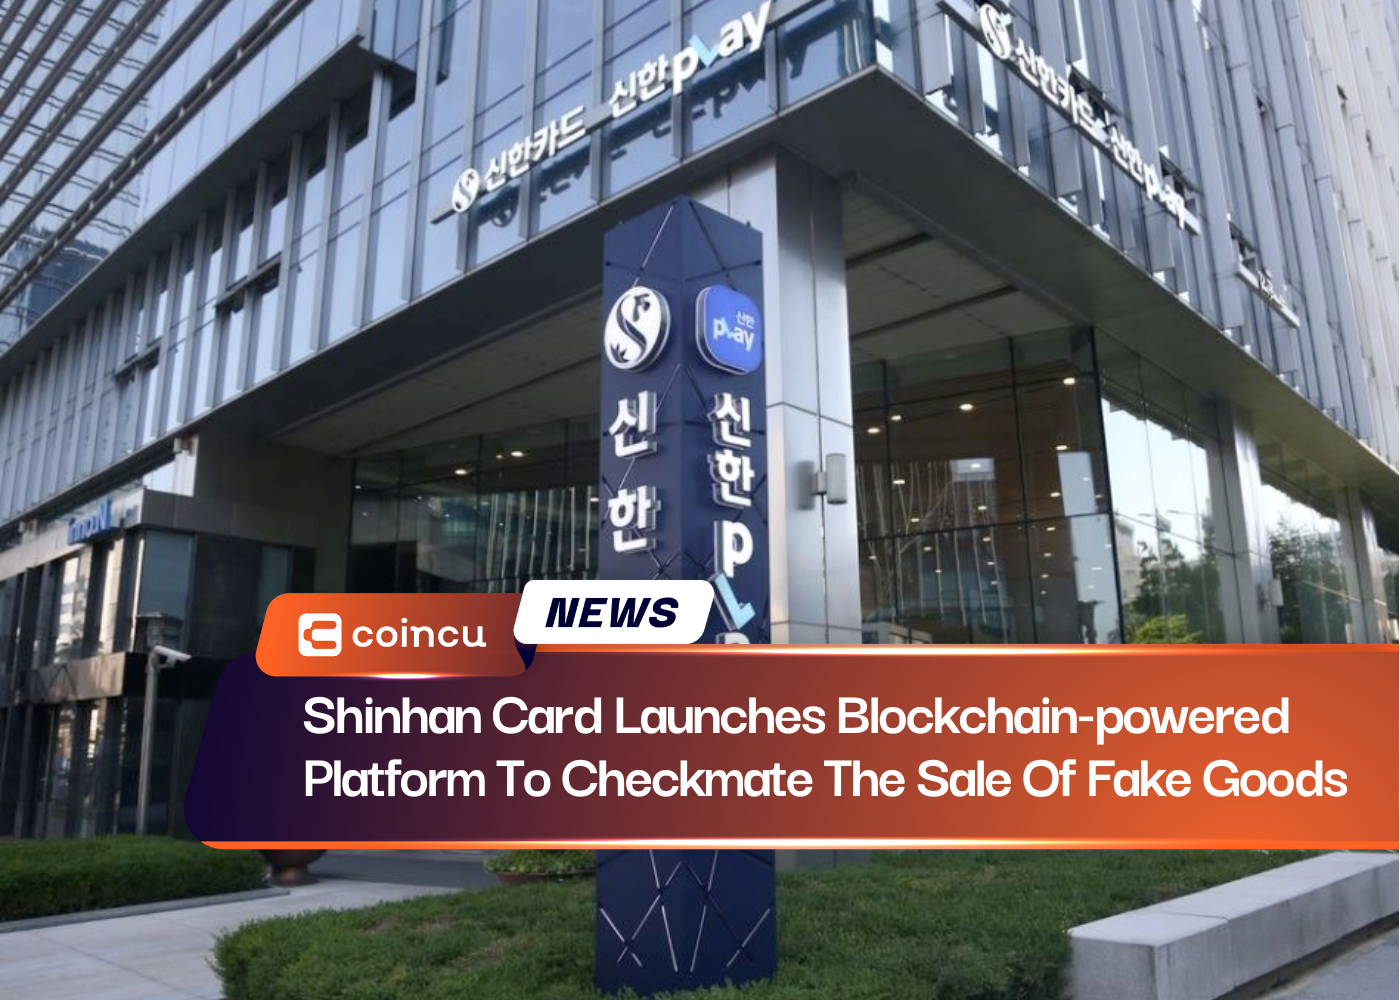 Shinhan Card Launches Blockchain-powered Platform To Checkmate The Sale Of Fake Goods